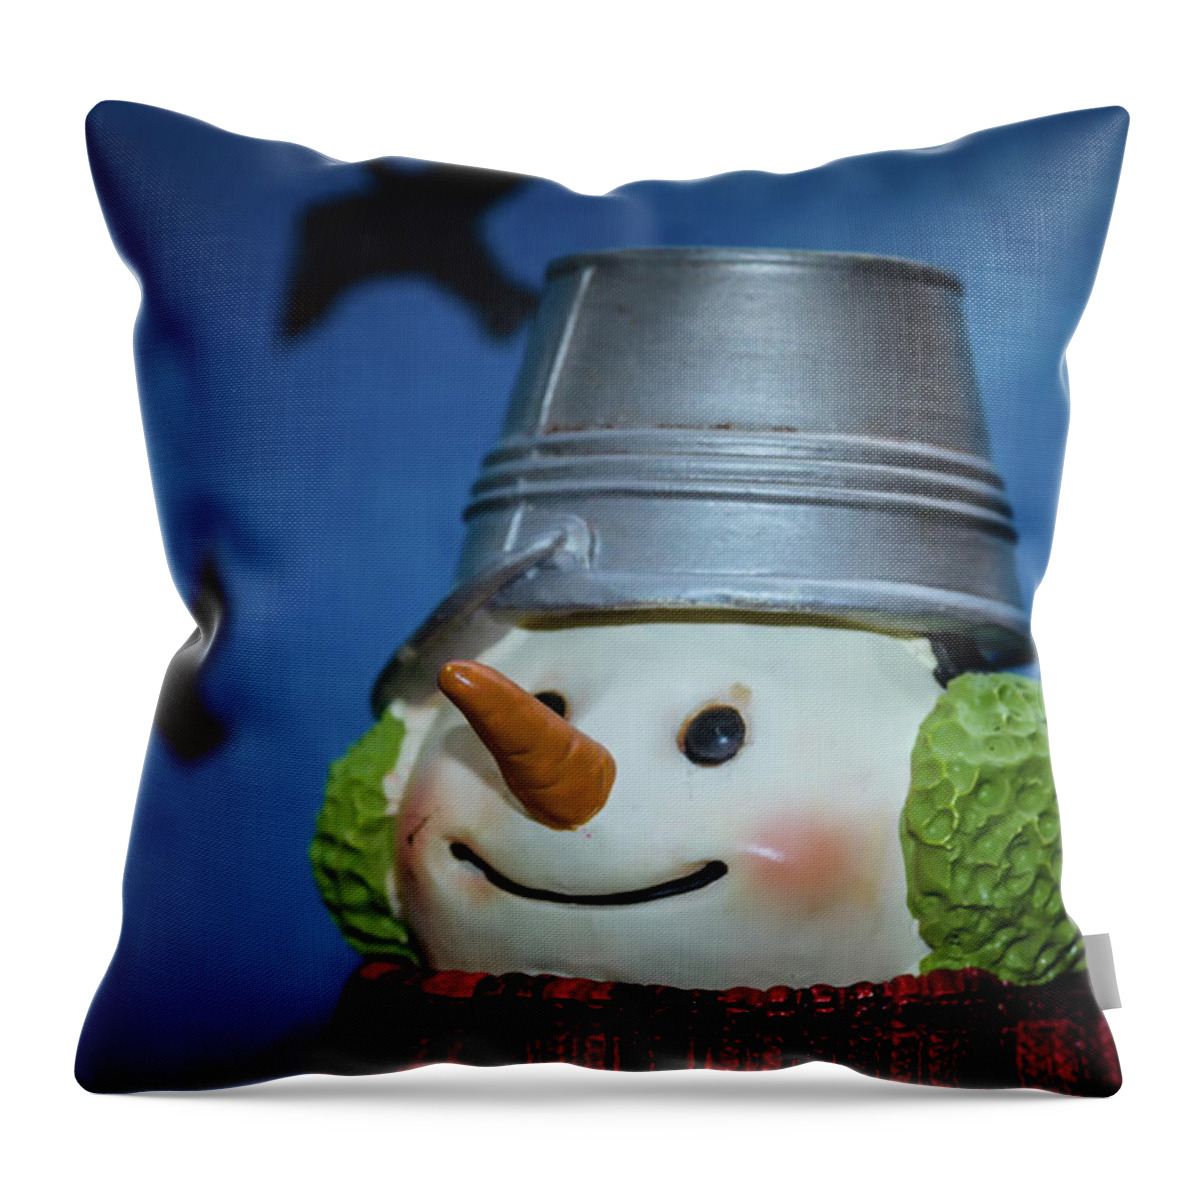 Bucket Throw Pillow featuring the photograph Smiling Snowman by Jim Shackett